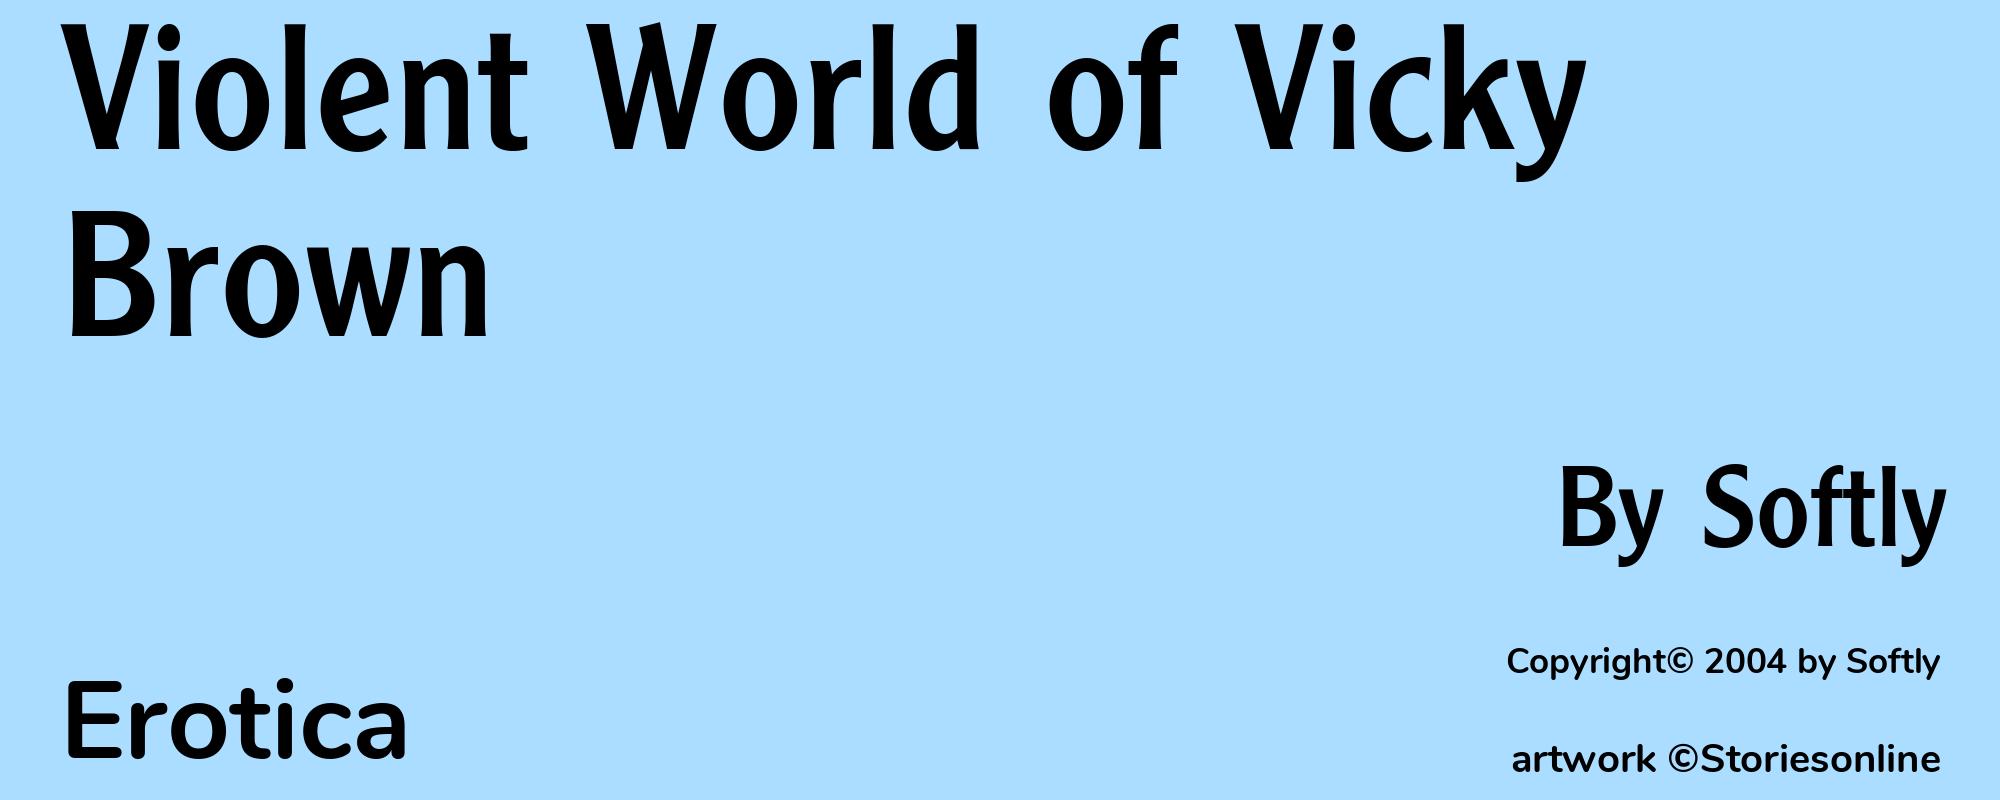 Violent World of Vicky Brown - Cover